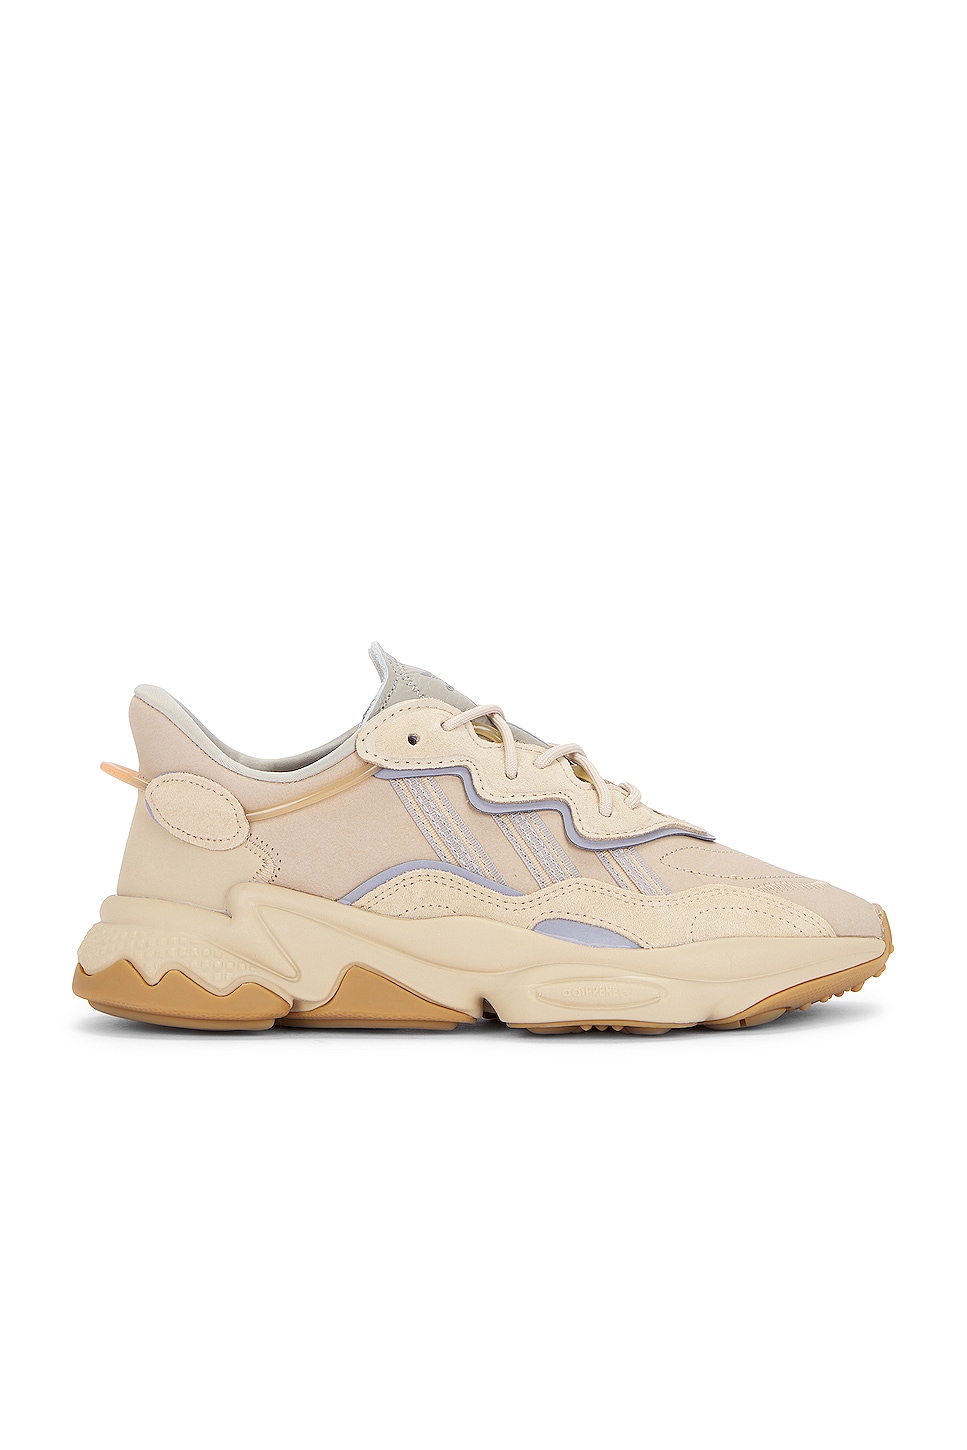 Image 1 of adidas Originals Ozweego in St Pale Nude